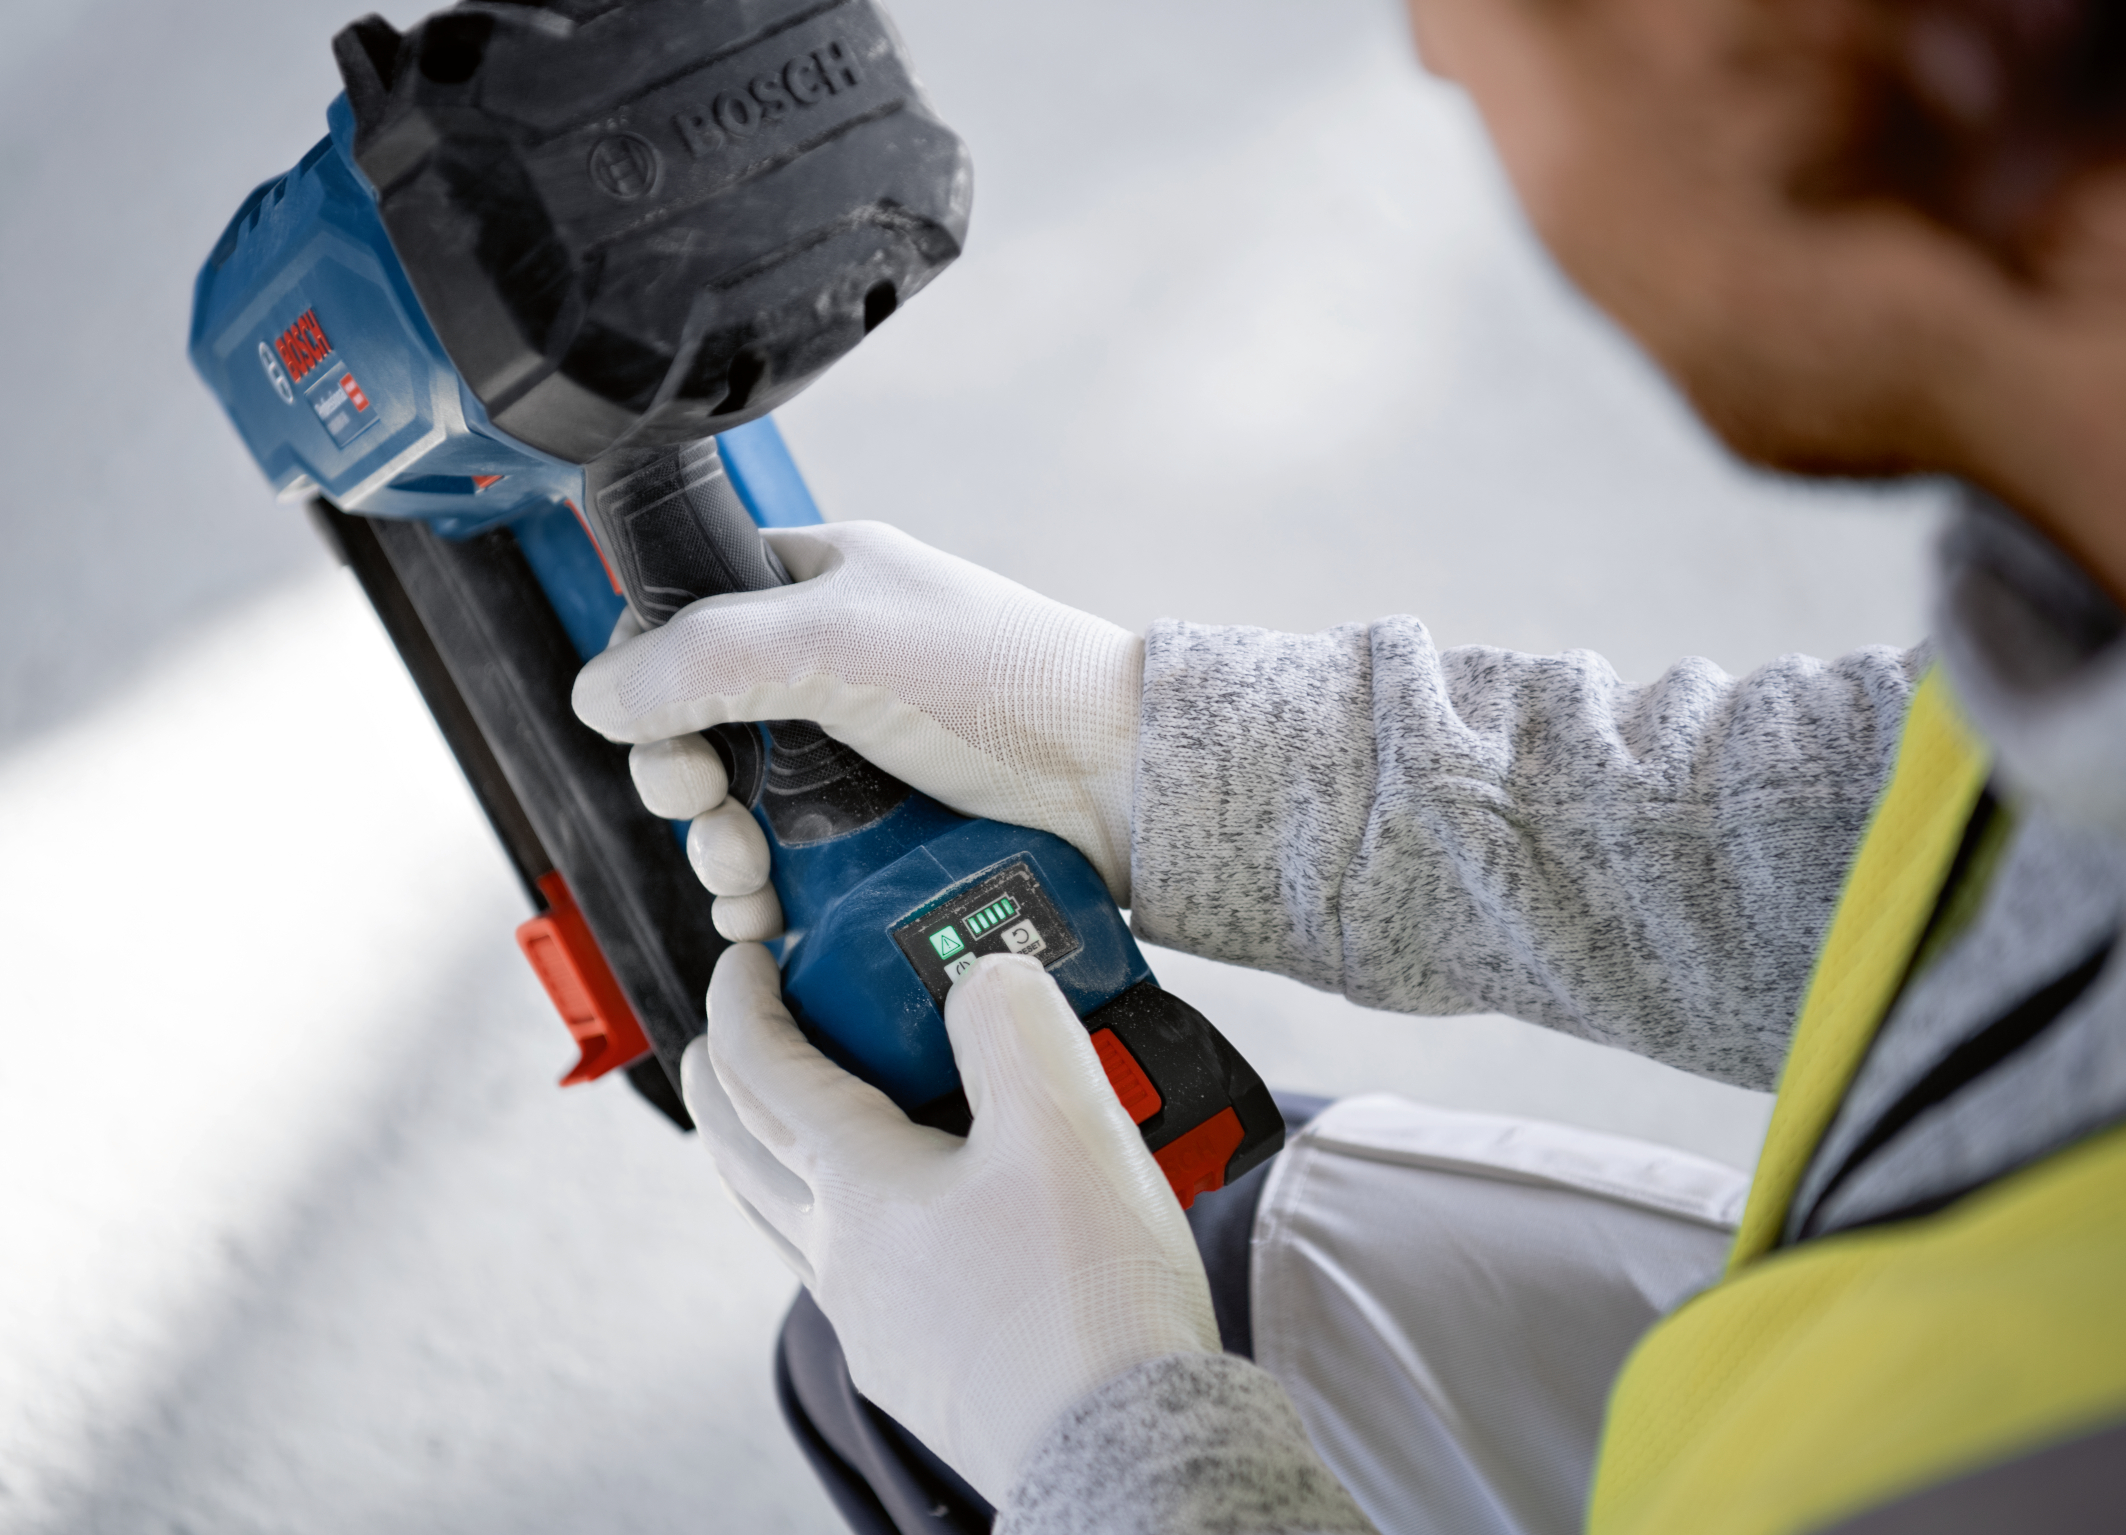 Efficient work and full control at all times: First professional cordless concrete nailer from Bosch